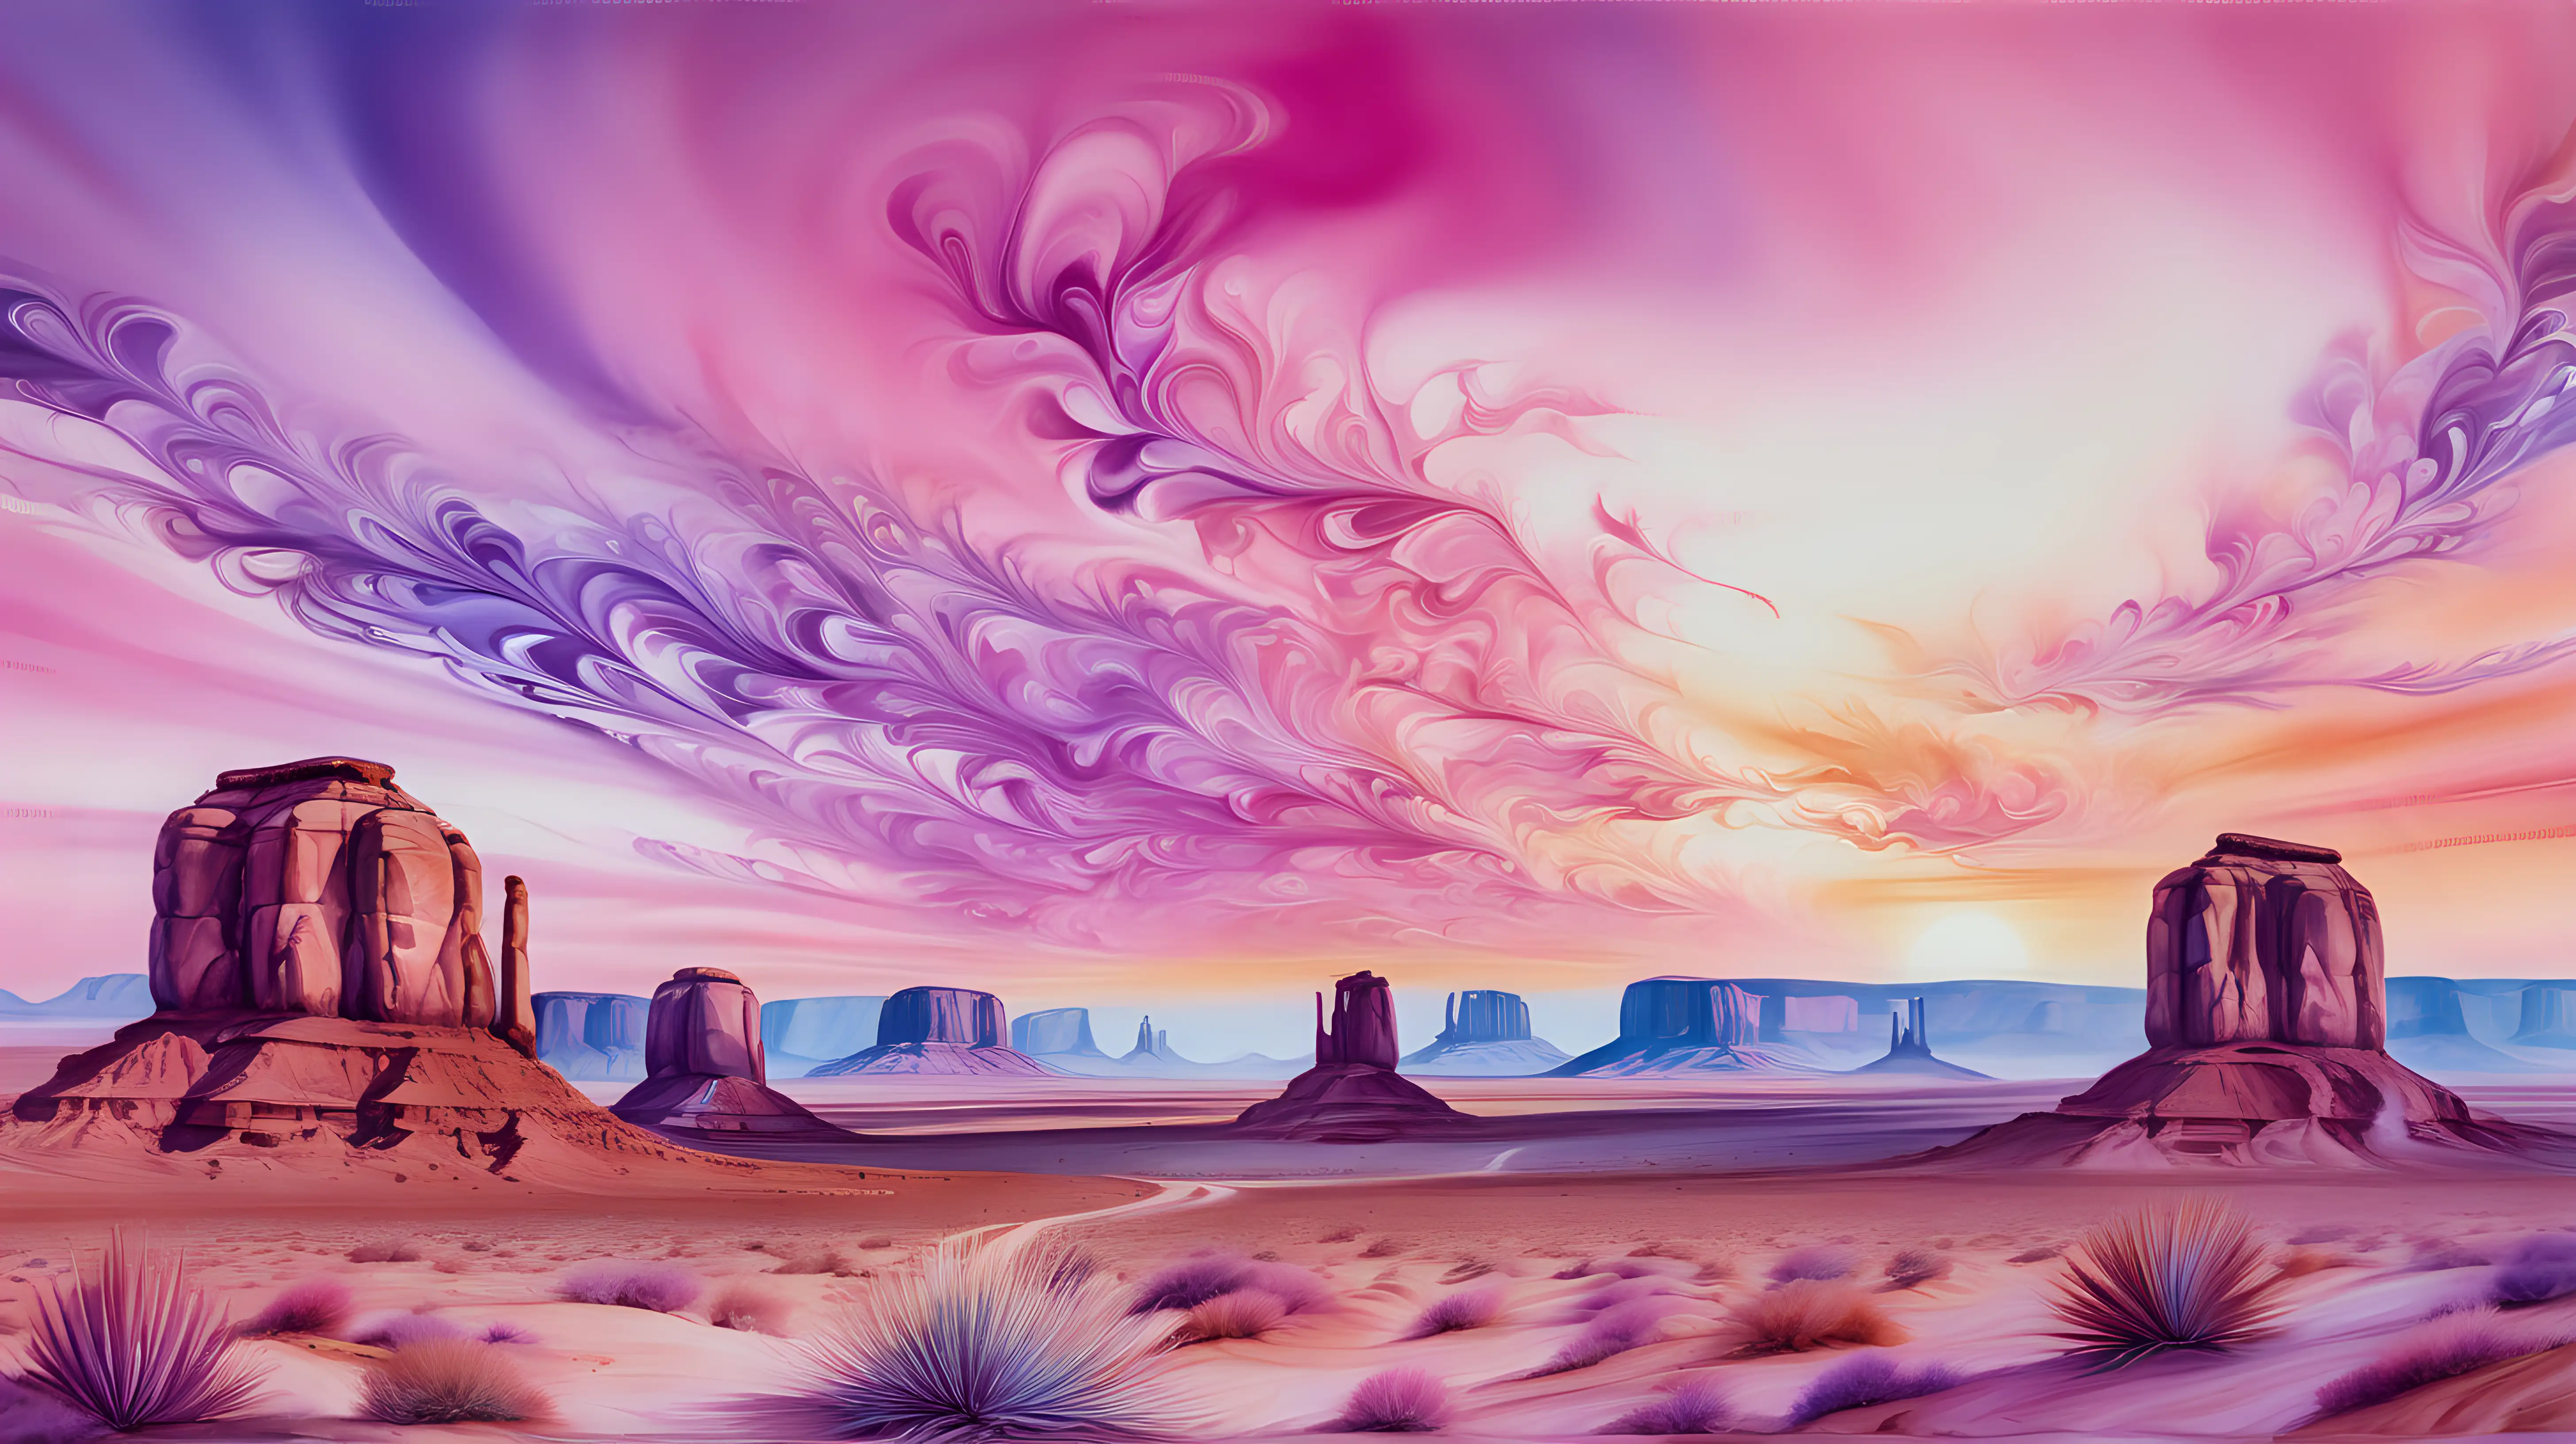 Psychedelic Desert Sunset Painting with MirageLike Distortions